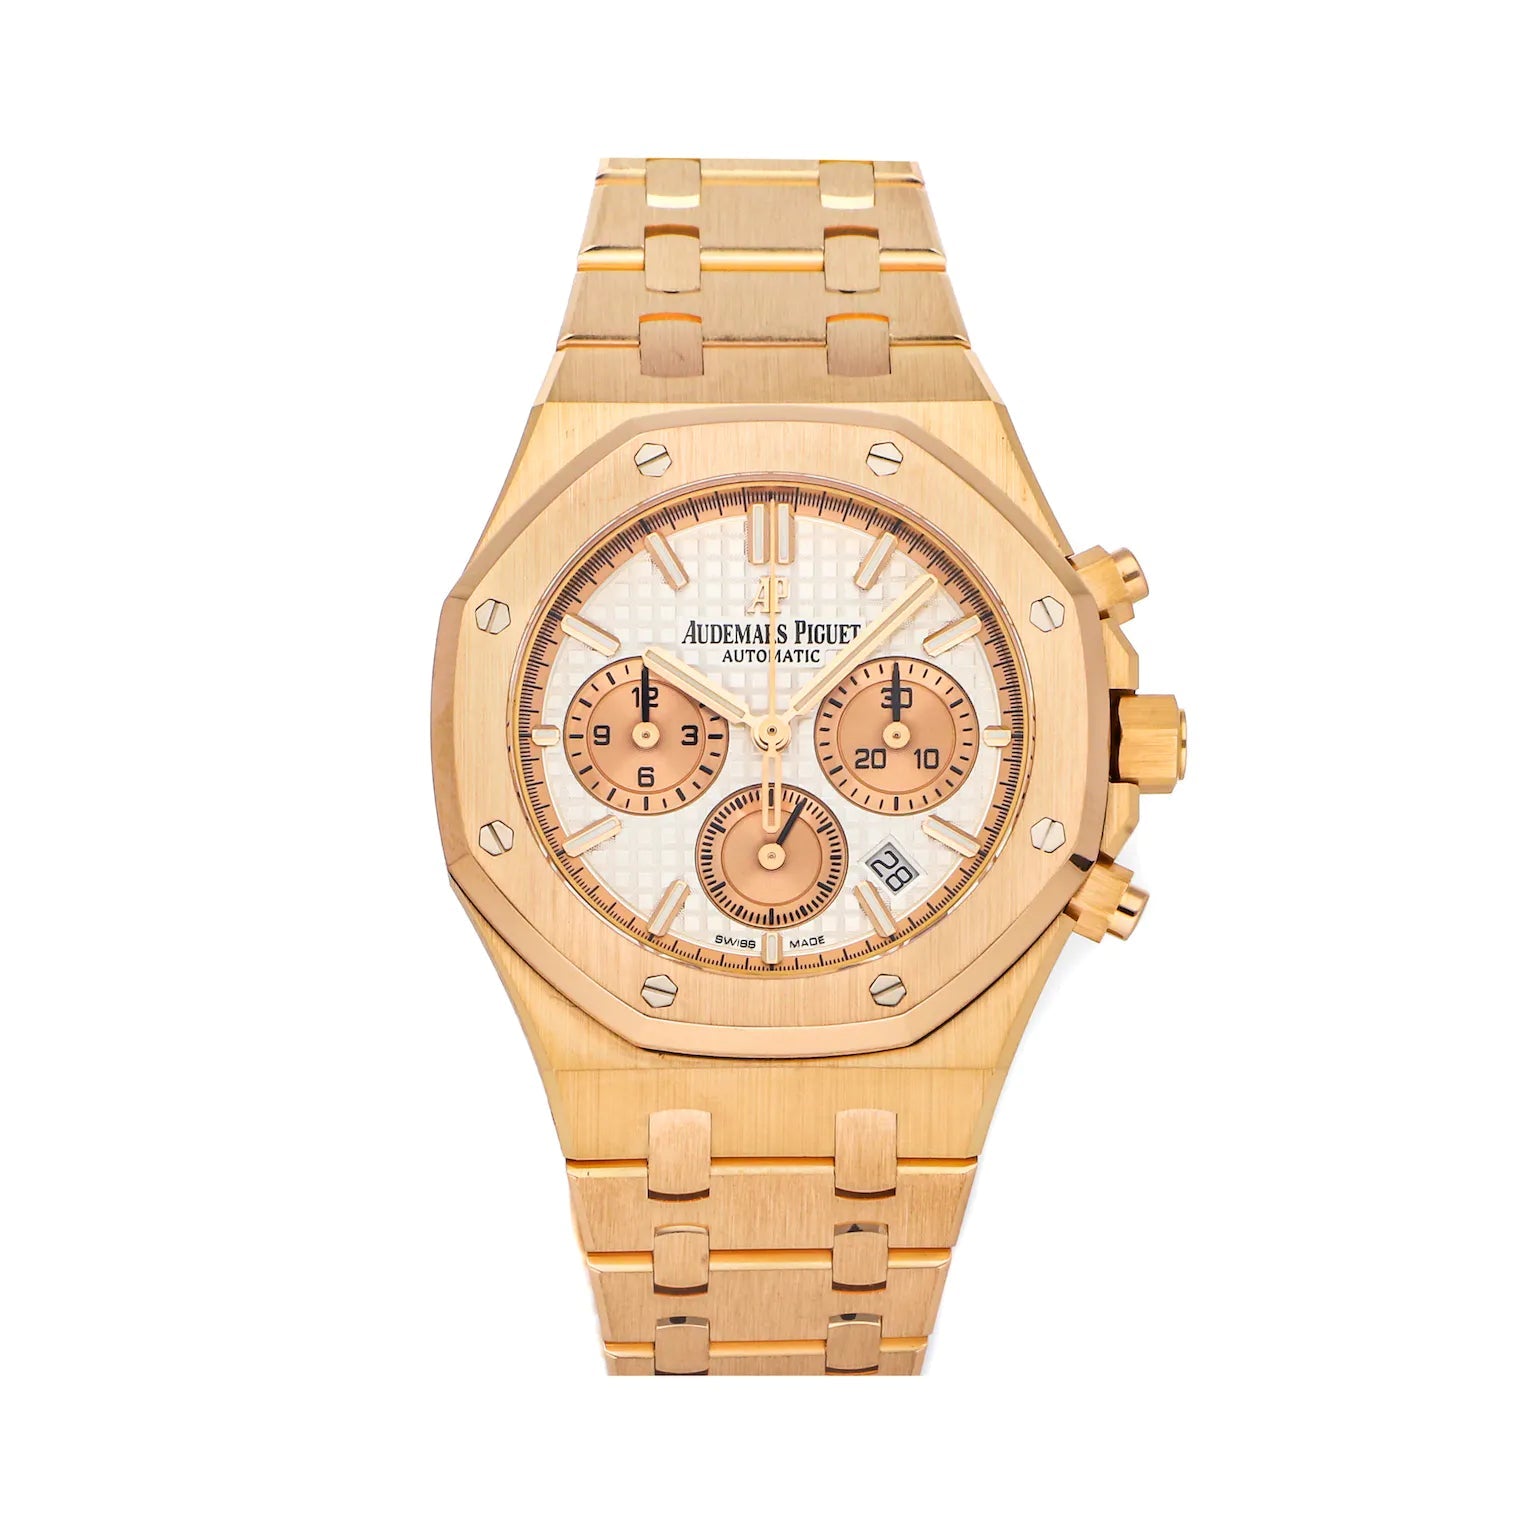 Audemars Piguet Royal Oak for Rs.2,678,384 for sale from a Private Seller  on Chrono24